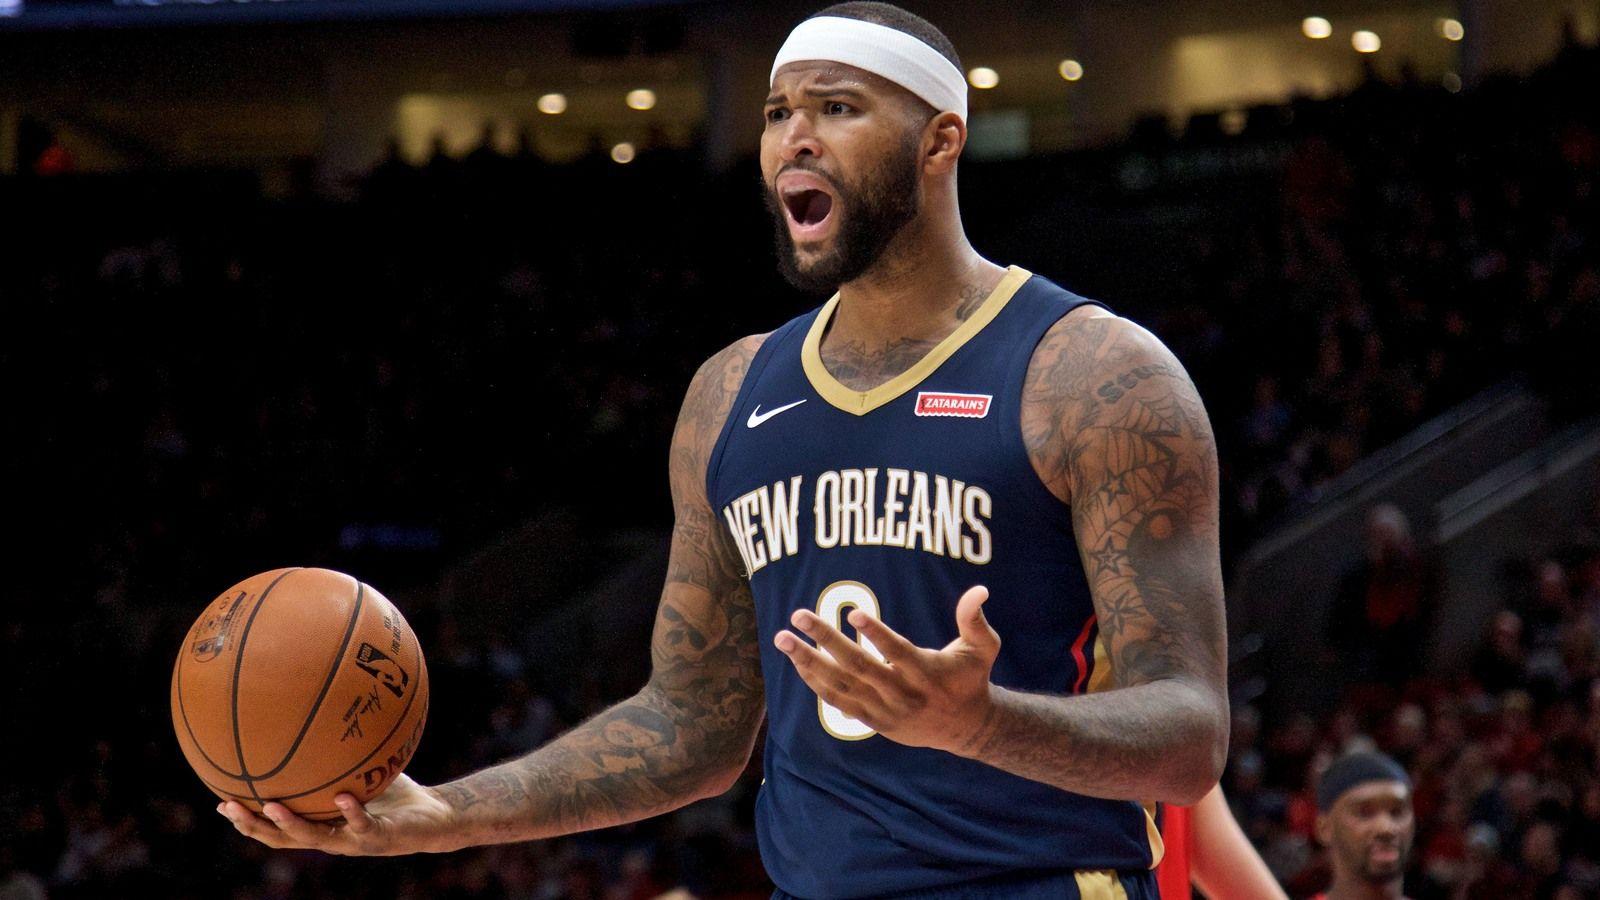 PHOTO: DeMarcus Cousins went looking for Durant after ejection